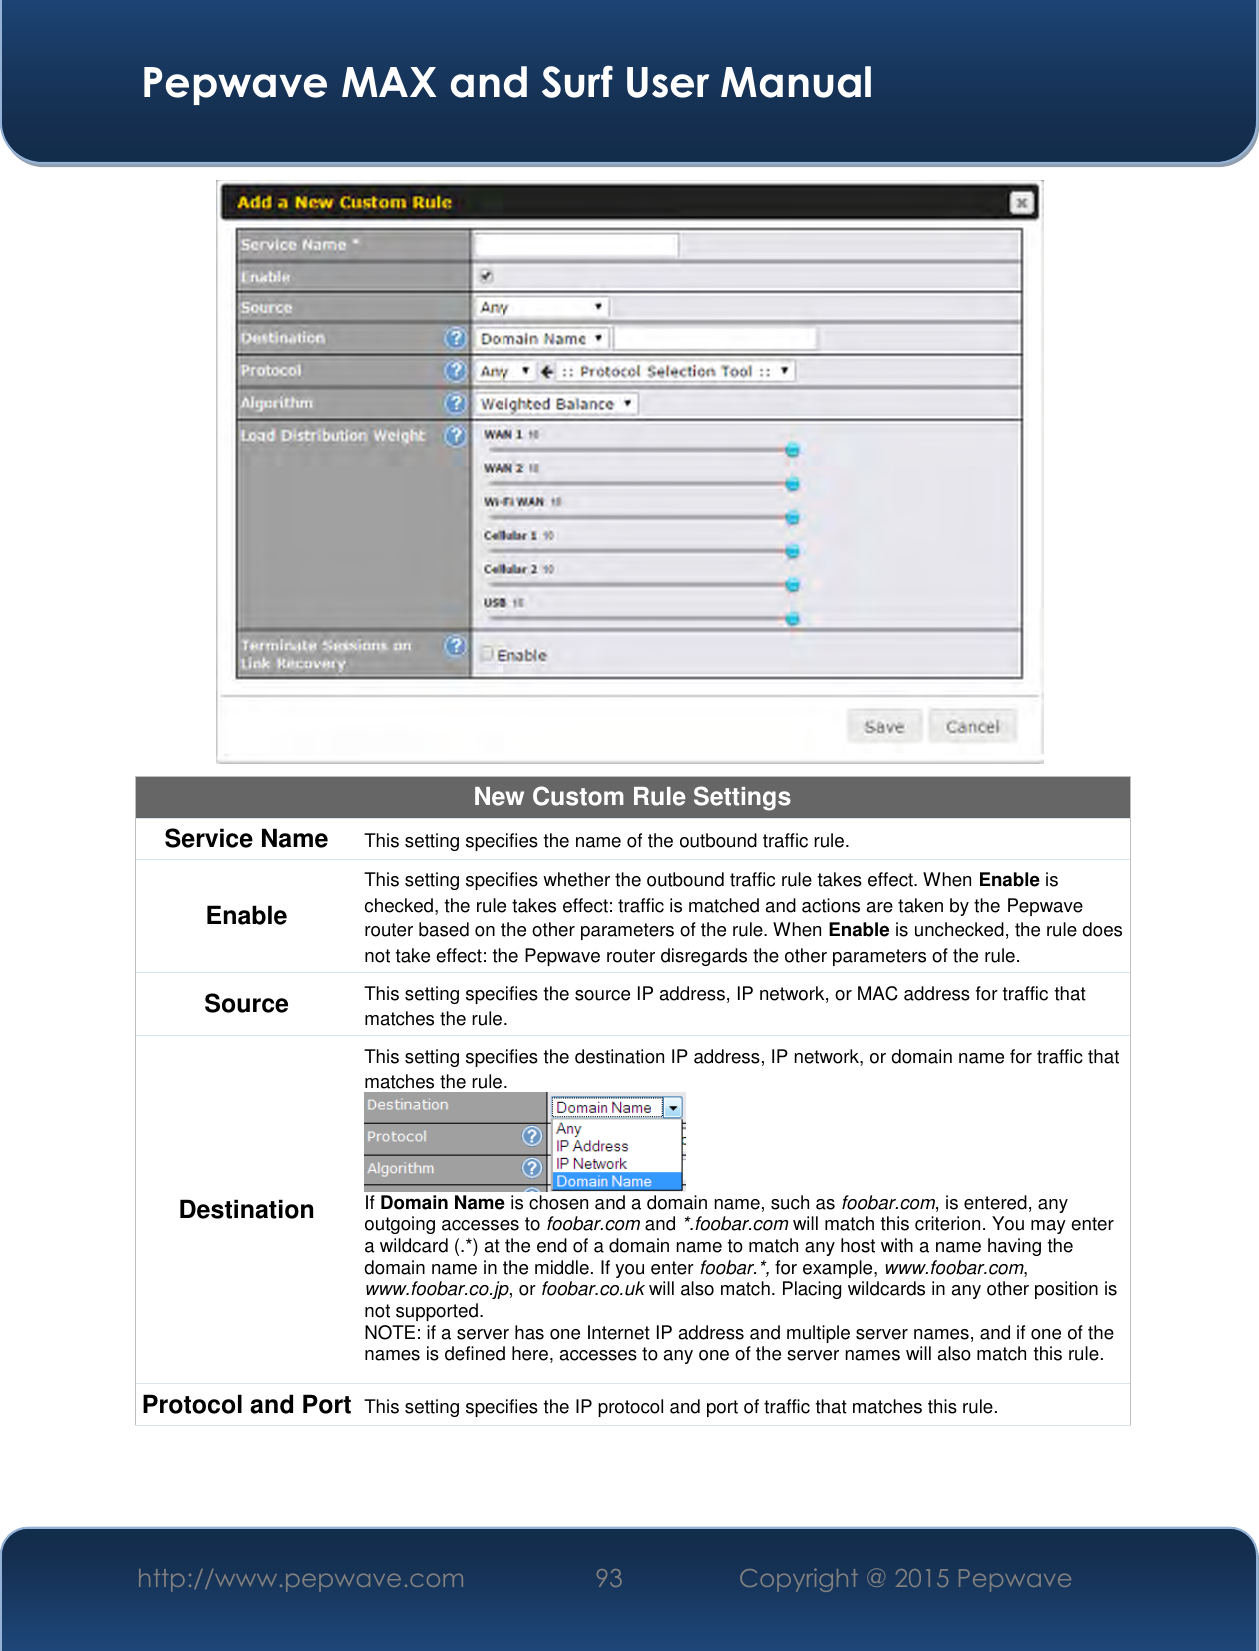  Pepwave MAX and Surf User Manual http://www.pepwave.com 93   Copyright @ 2015 Pepwave    New Custom Rule Settings Service Name This setting specifies the name of the outbound traffic rule. Enable This setting specifies whether the outbound traffic rule takes effect. When Enable is checked, the rule takes effect: traffic is matched and actions are taken by the Pepwave router based on the other parameters of the rule. When Enable is unchecked, the rule does not take effect: the Pepwave router disregards the other parameters of the rule. Source This setting specifies the source IP address, IP network, or MAC address for traffic that matches the rule. Destination This setting specifies the destination IP address, IP network, or domain name for traffic that matches the rule.  If Domain Name is chosen and a domain name, such as foobar.com, is entered, any outgoing accesses to foobar.com and *.foobar.com will match this criterion. You may enter a wildcard (.*) at the end of a domain name to match any host with a name having the domain name in the middle. If you enter foobar.*, for example, www.foobar.com, www.foobar.co.jp, or foobar.co.uk will also match. Placing wildcards in any other position is not supported. NOTE: if a server has one Internet IP address and multiple server names, and if one of the names is defined here, accesses to any one of the server names will also match this rule. Protocol and Port This setting specifies the IP protocol and port of traffic that matches this rule. 